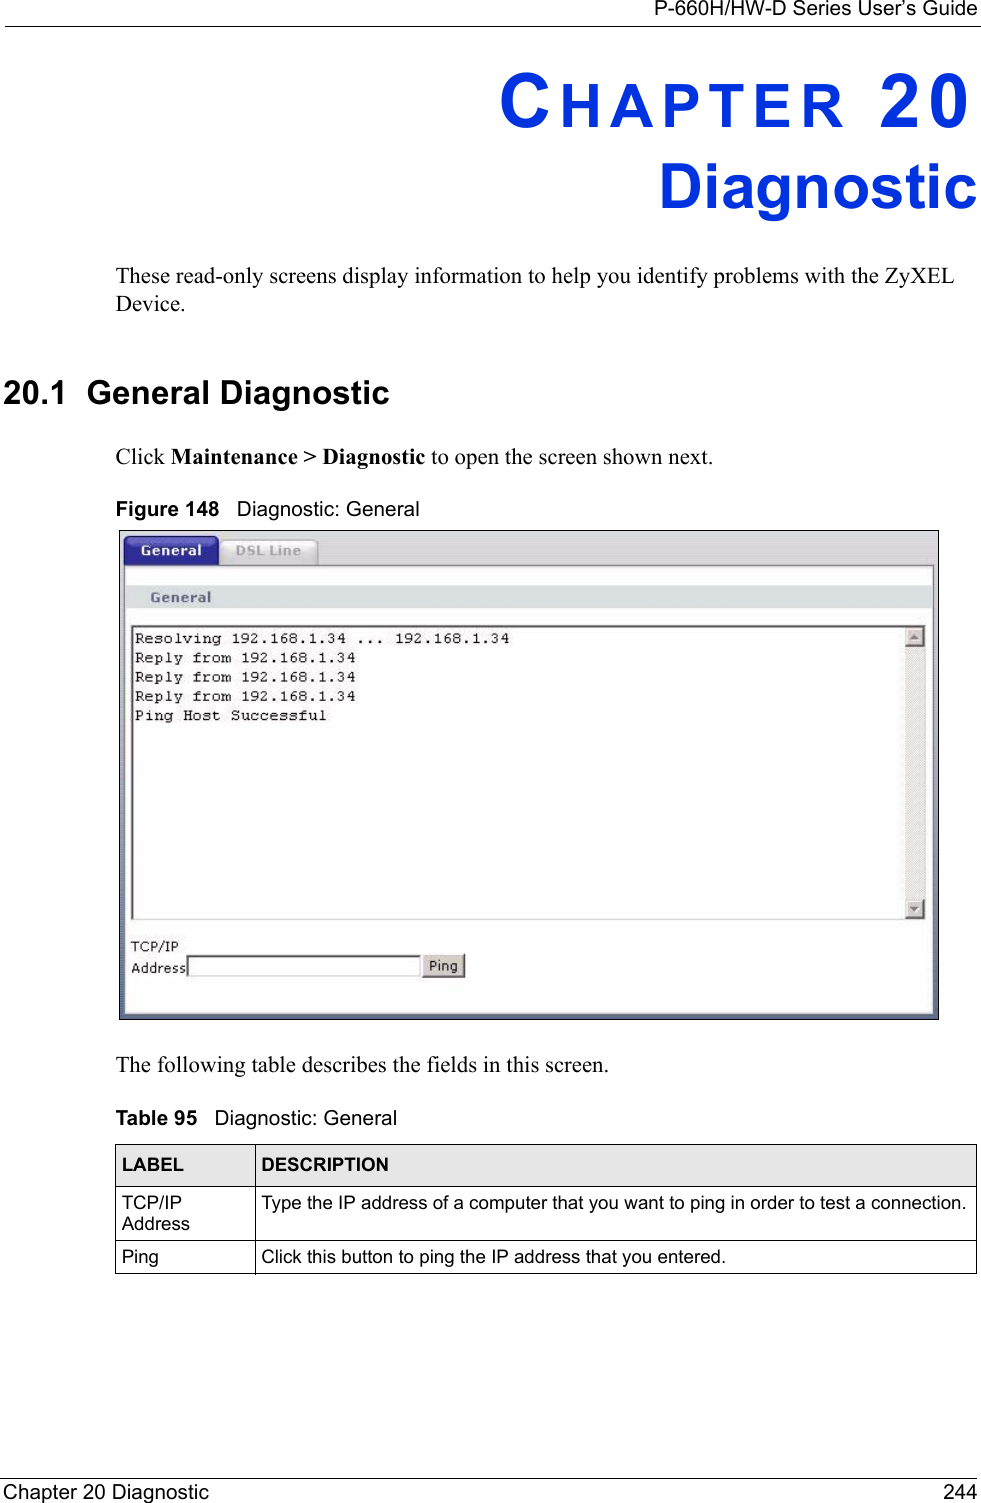 P-660H/HW-D Series User’s GuideChapter 20 Diagnostic 244CHAPTER 20DiagnosticThese read-only screens display information to help you identify problems with the ZyXEL Device.20.1  General Diagnostic     Click Maintenance &gt; Diagnostic to open the screen shown next. Figure 148   Diagnostic: GeneralThe following table describes the fields in this screen. Table 95   Diagnostic: GeneralLABEL DESCRIPTIONTCP/IP AddressType the IP address of a computer that you want to ping in order to test a connection.Ping Click this button to ping the IP address that you entered.